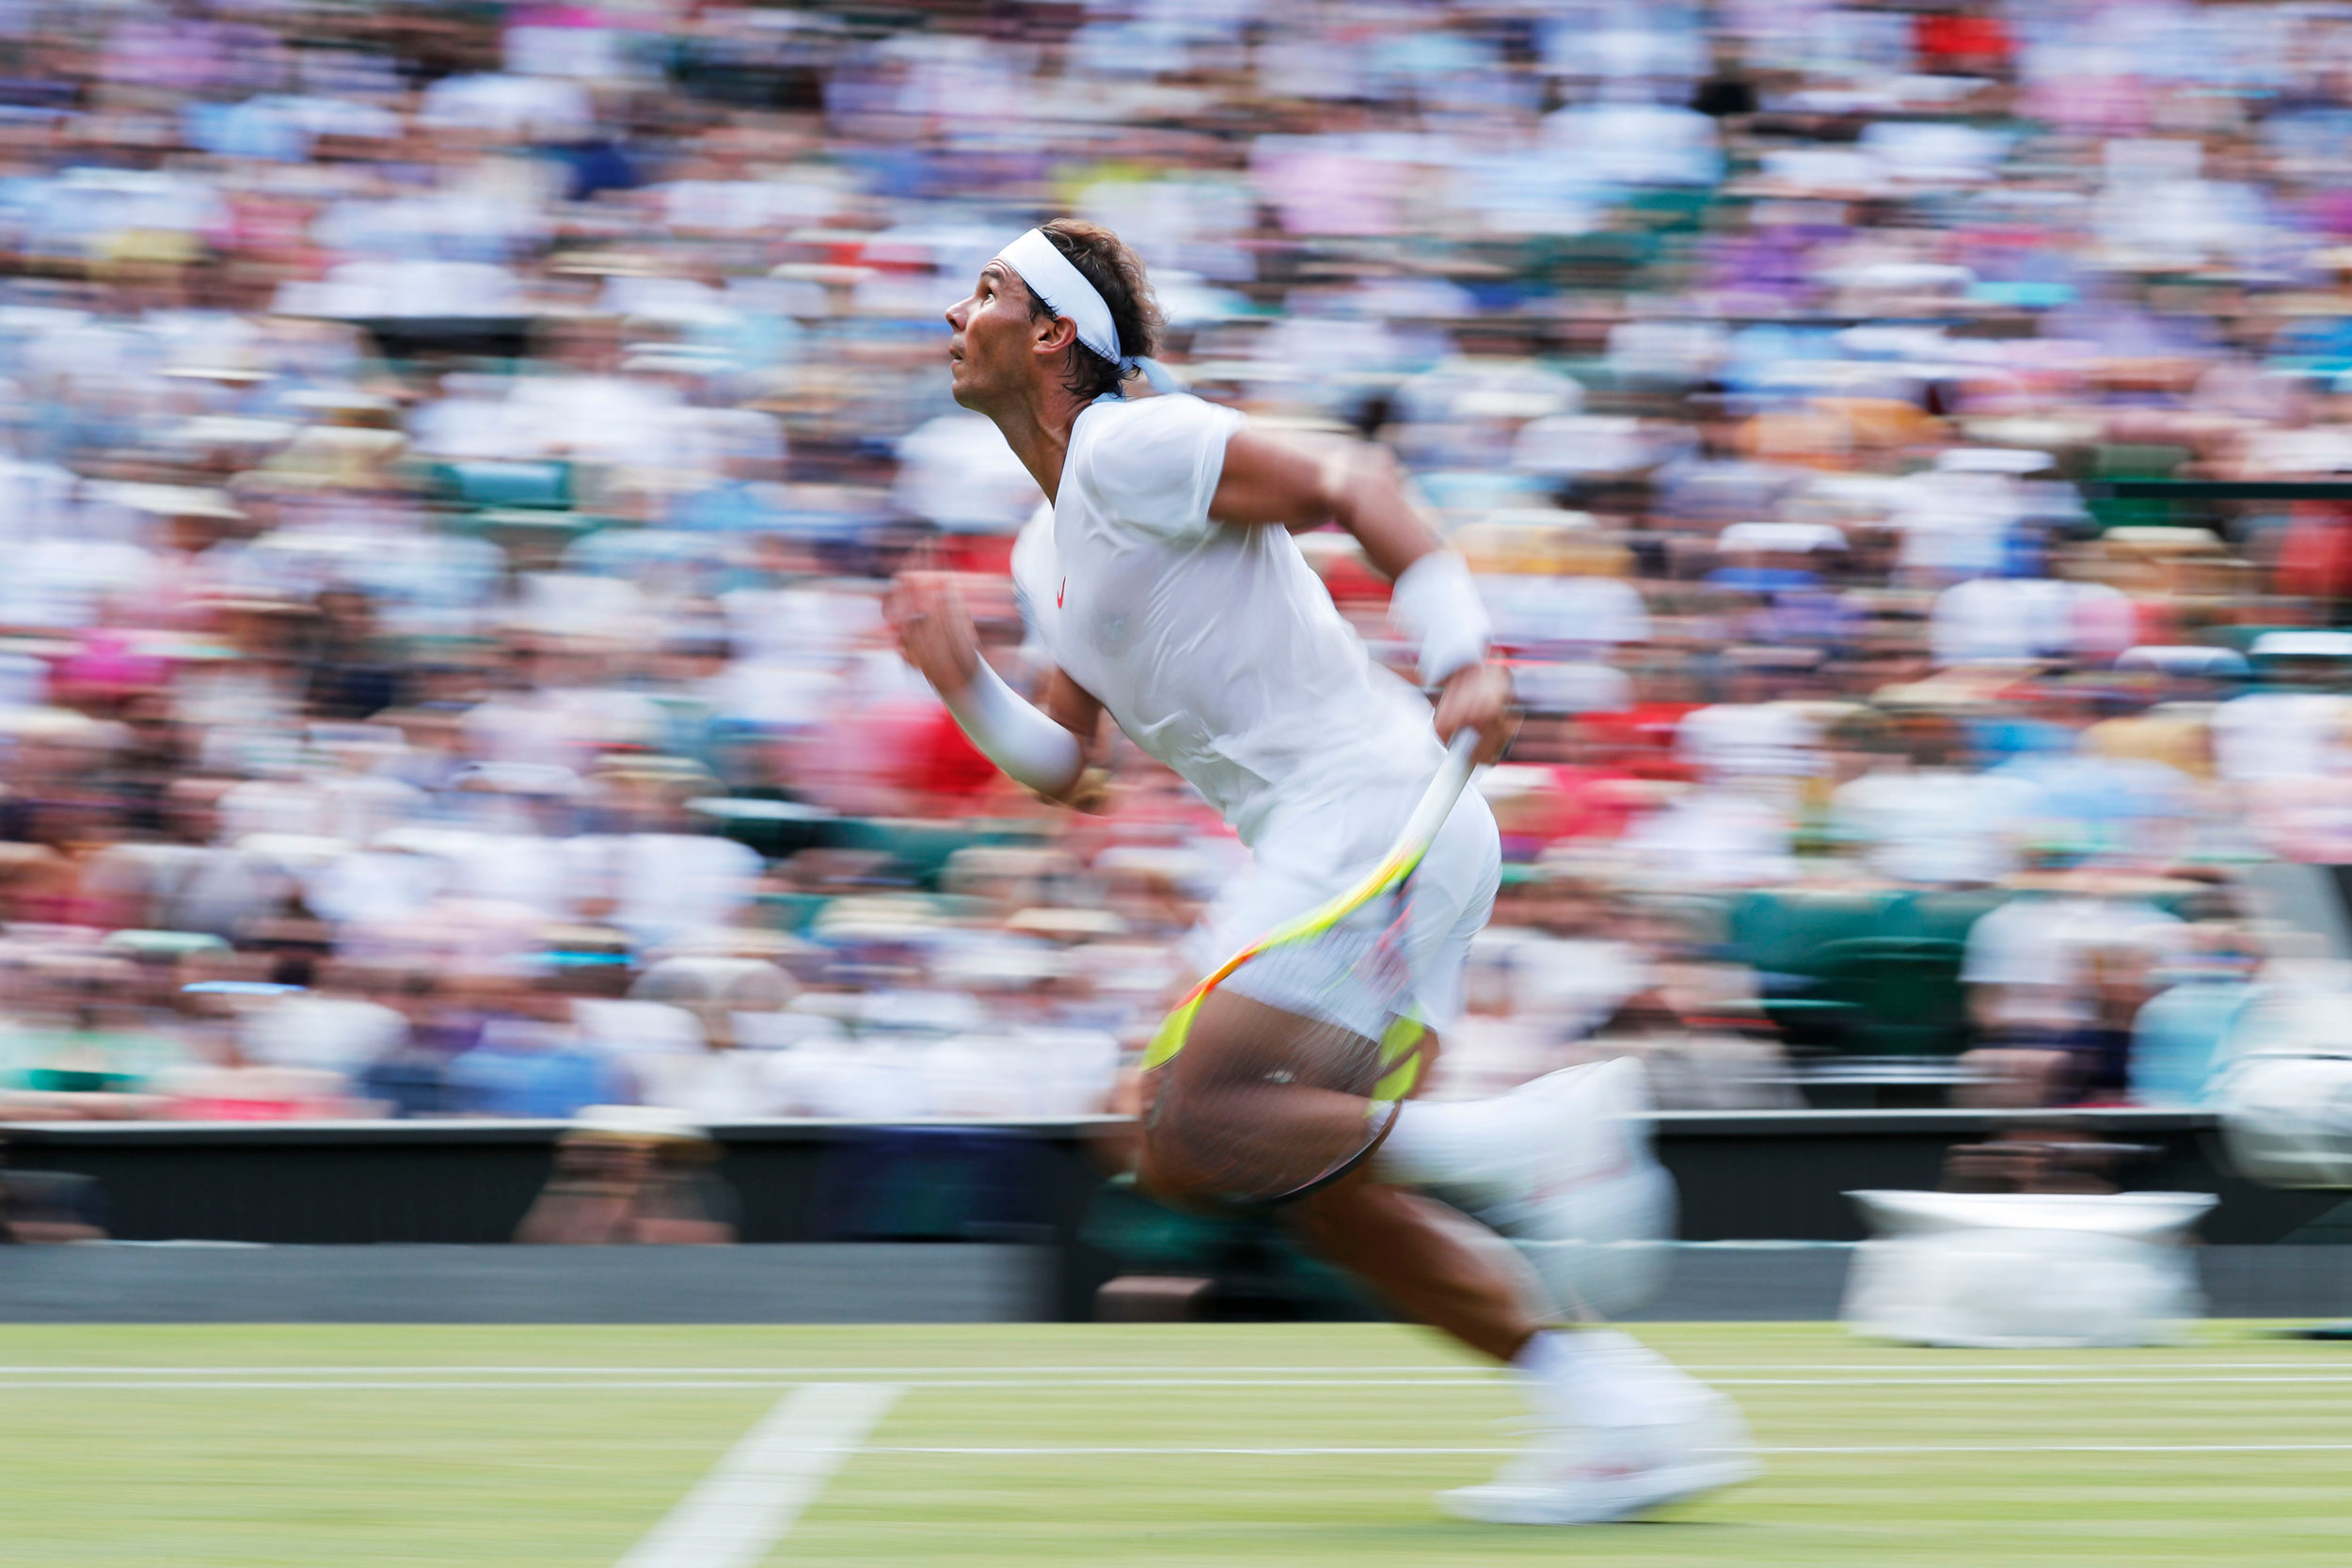  Rafael Nadal runs for the ball during a match with Alex de Minaur on centre court.
Photo by Heathcliff O'Malley, 07 July 2018
 